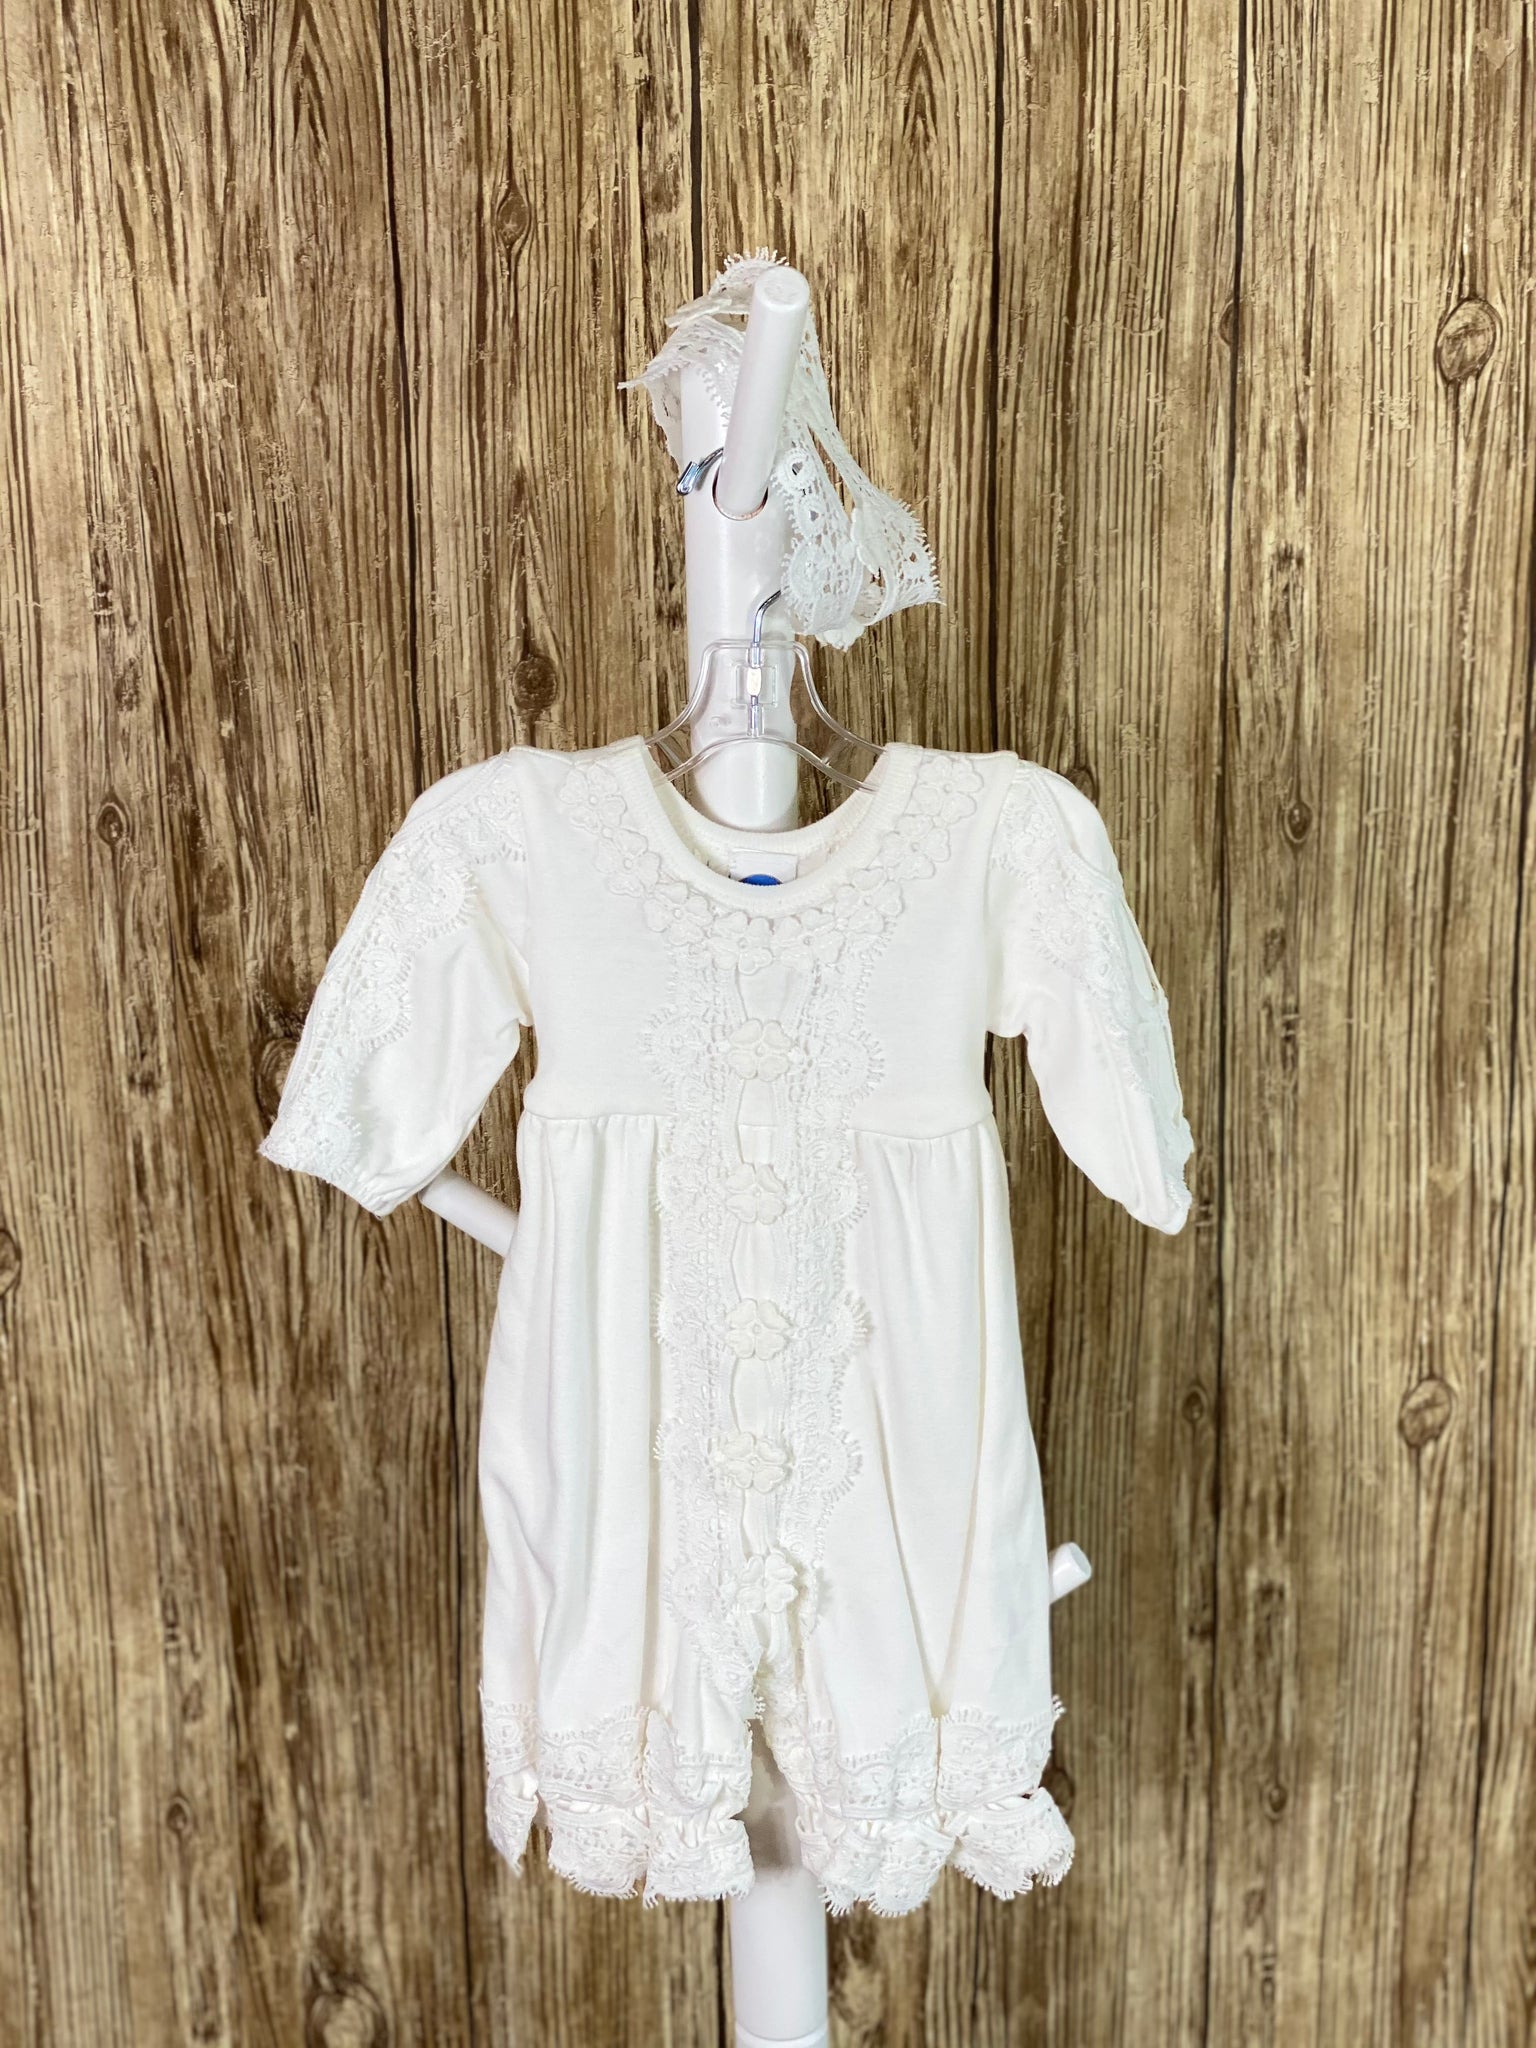 Cotton baby romper  Flower lace around neckline Flowered lace down center of romper and arms Lace around leg holes Lace headband